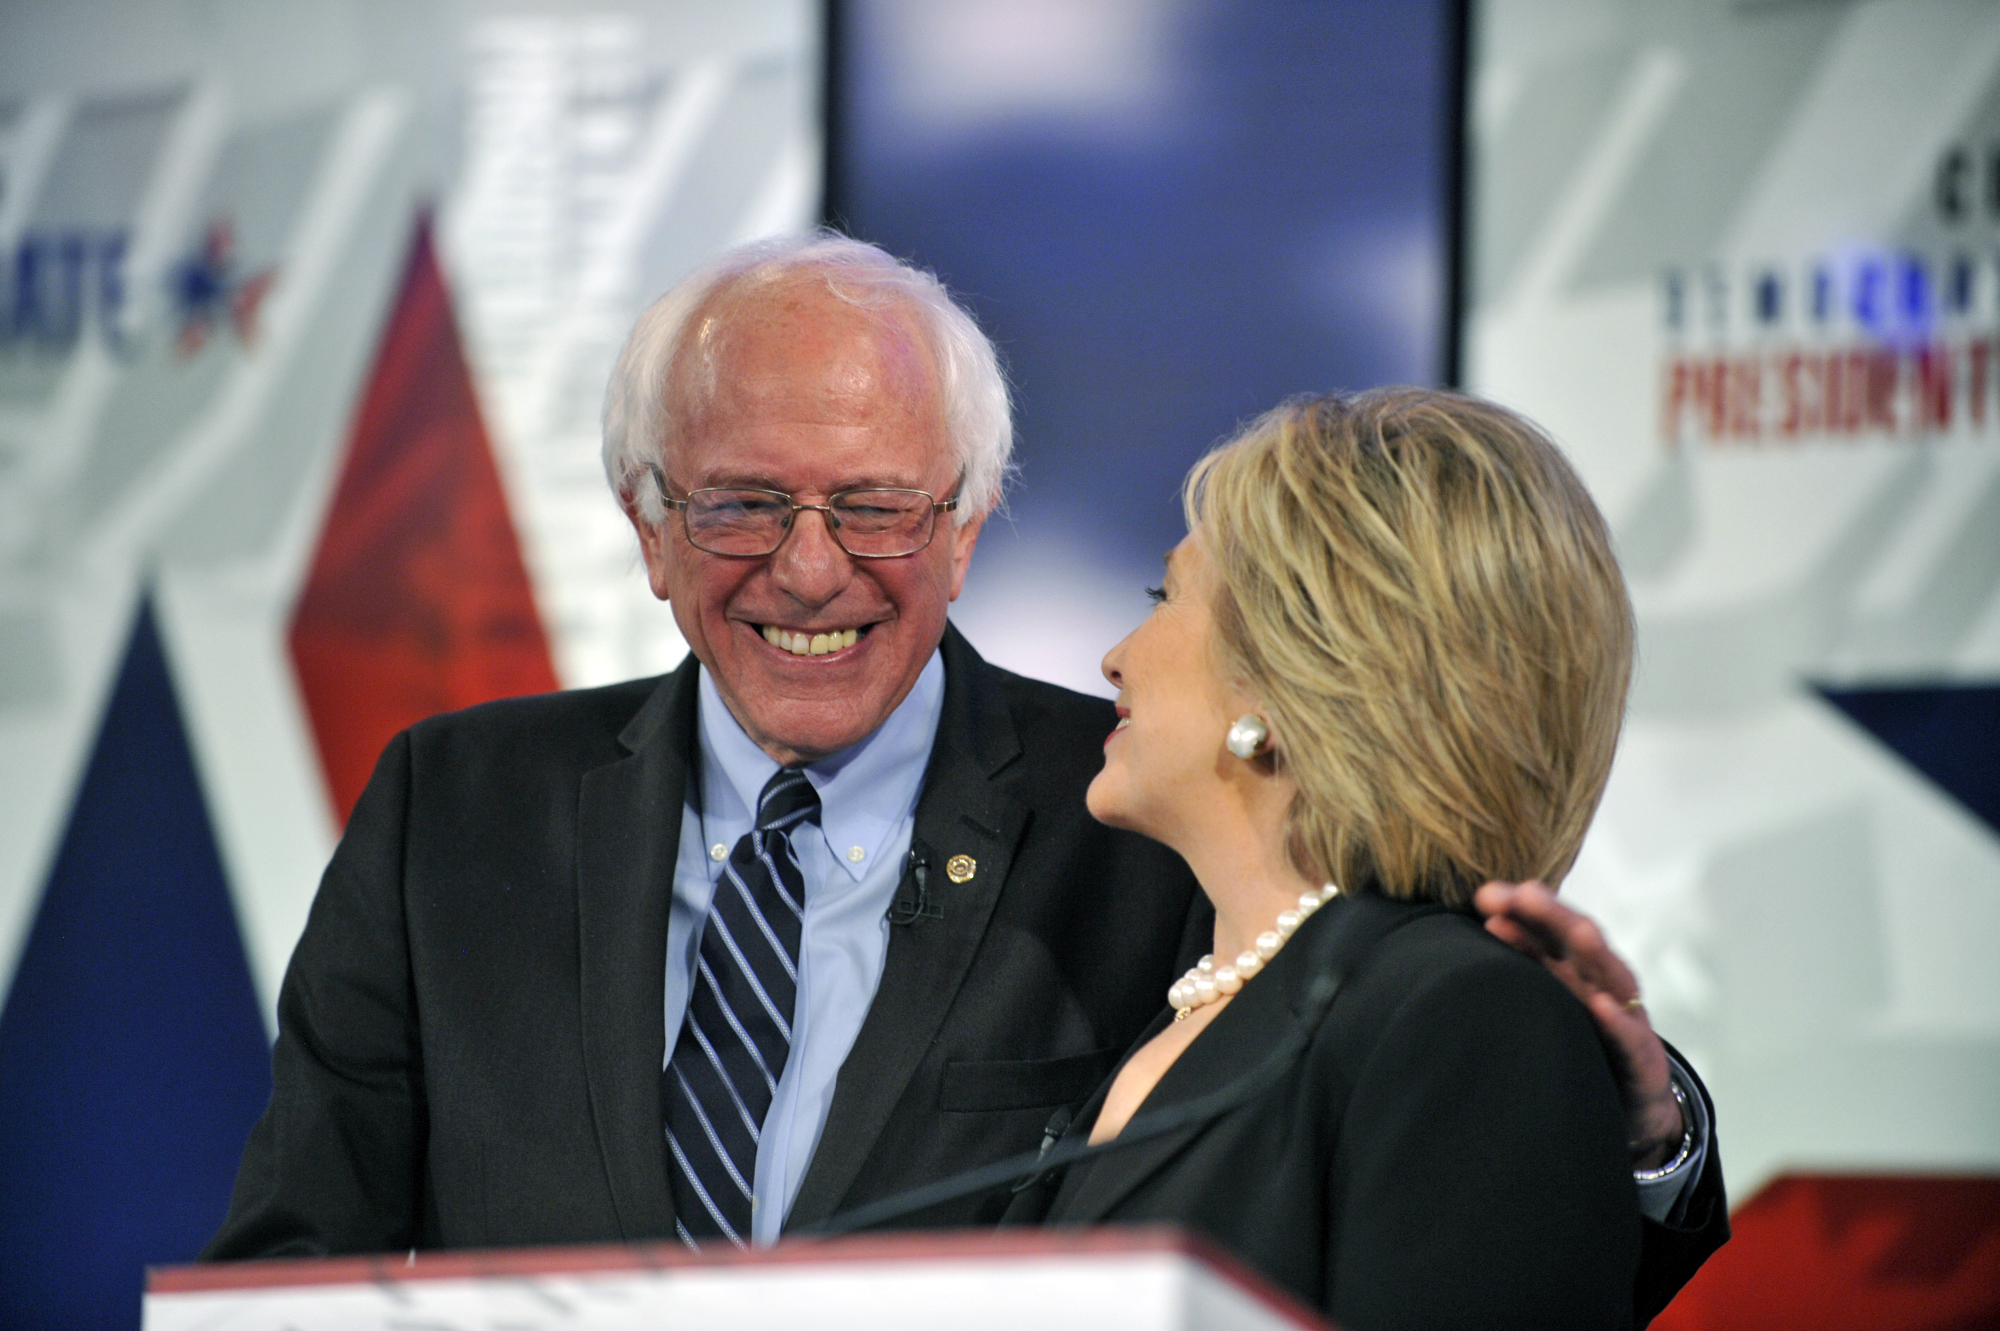 Sen. Bernie Sanders and Former U.S. Secretary of State Hillary Clinton at the Democratic Presidential Debate in Des Moines, Iowa on Nov. 14, 2015. (Chris Usher—CBS/Getty Images)